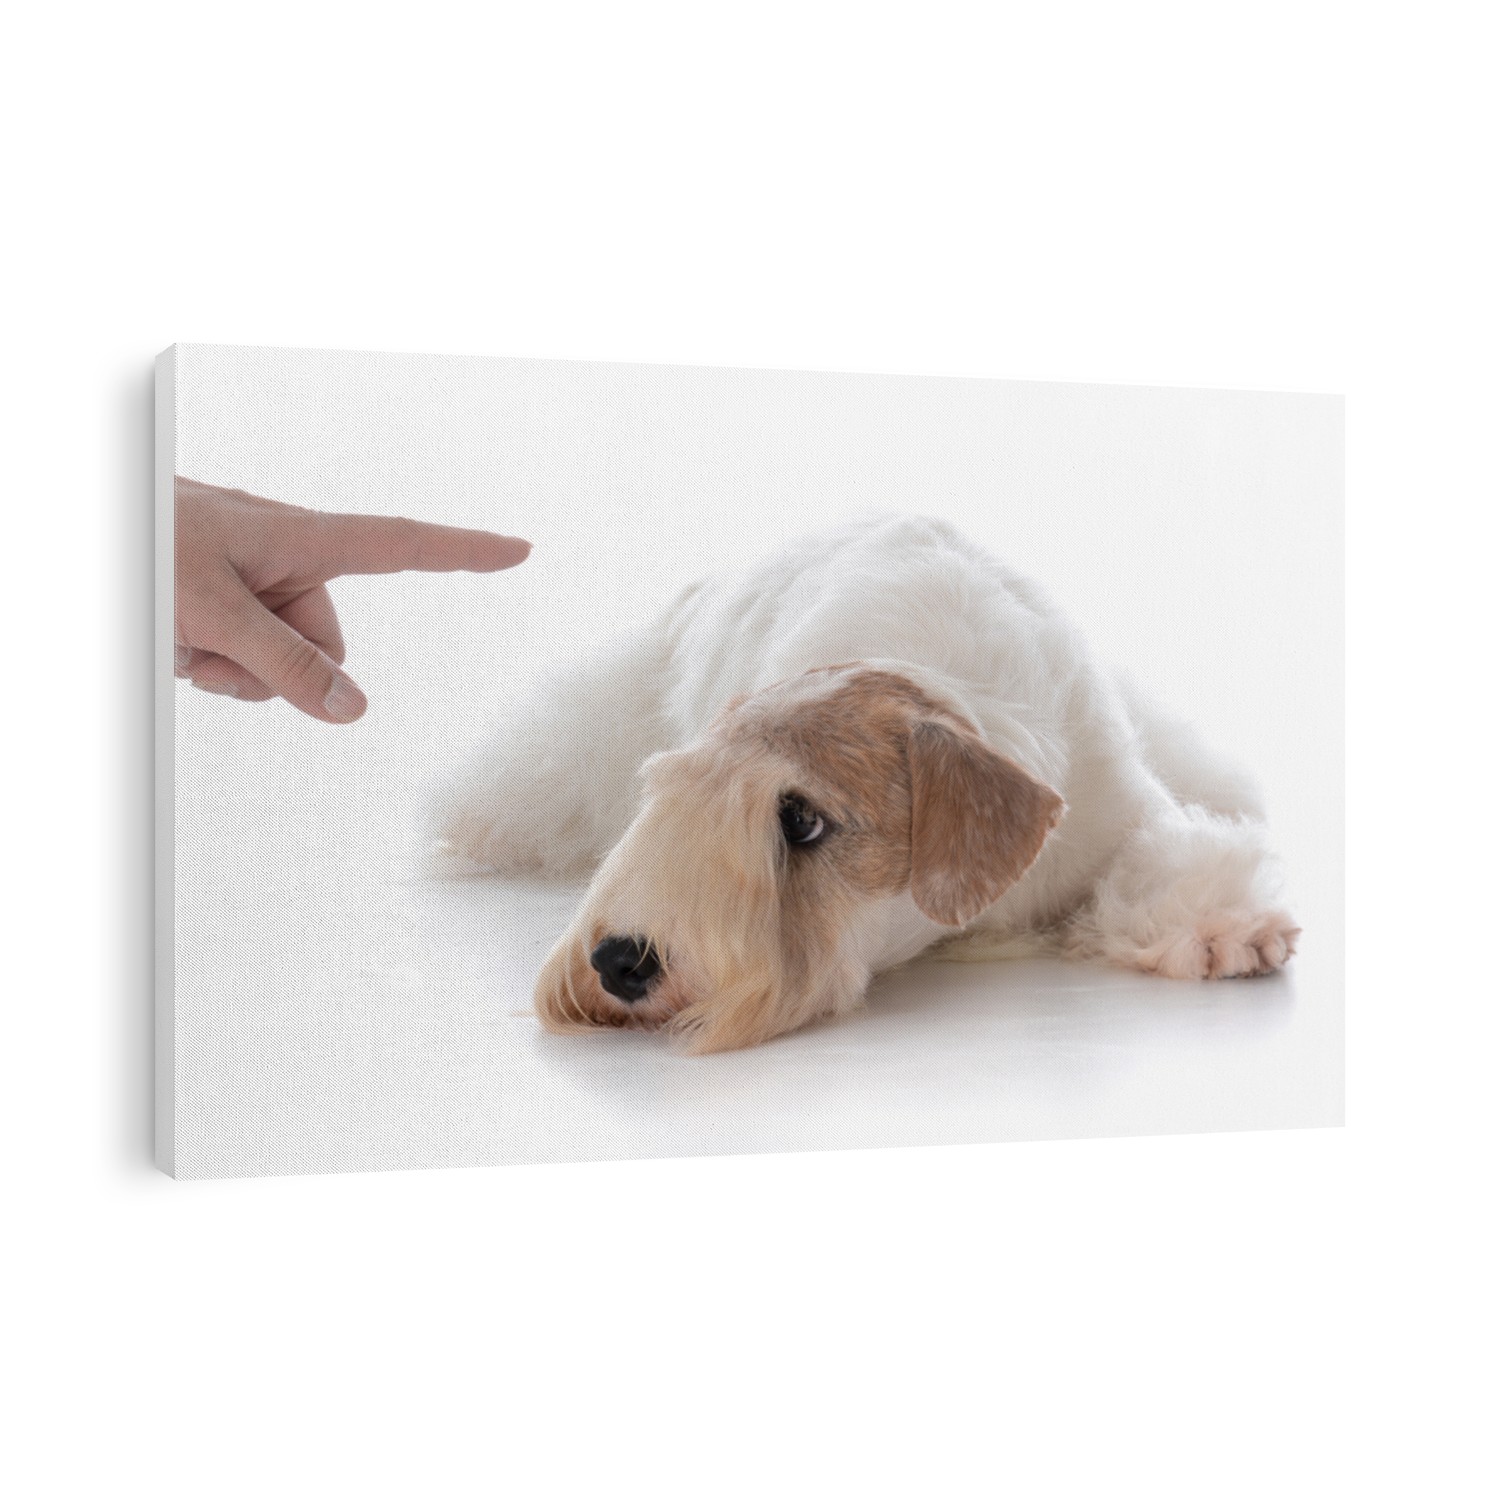 female sealyham terrier puppy being trained to stay isolated on white background